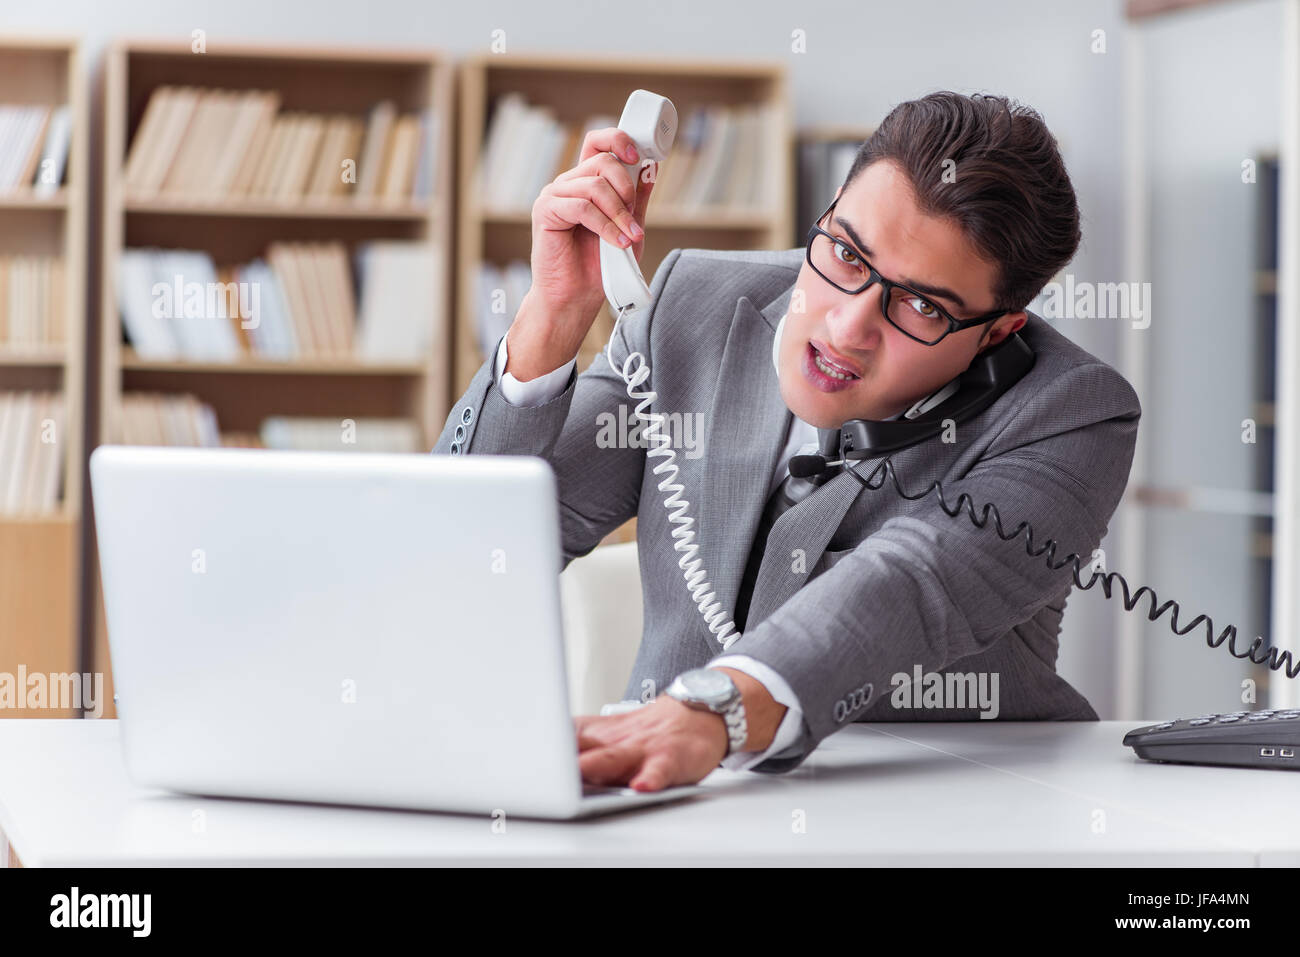 Angry Helpdesk Frustrated Furious Stock Photos Angry Helpdesk